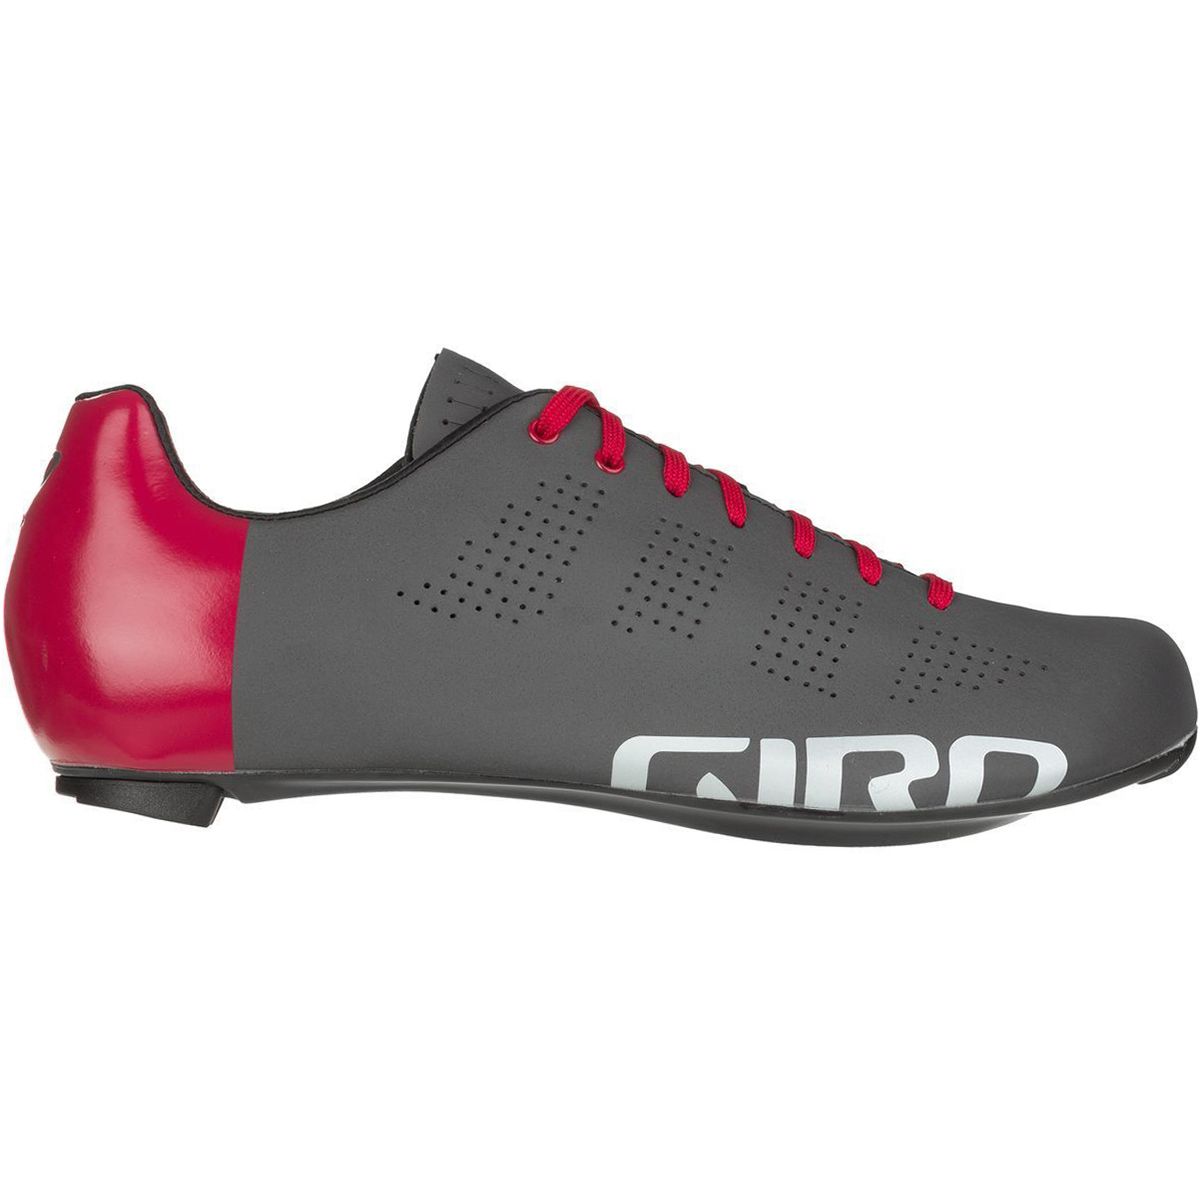 Giro Empire ACC Limited Edition Cycling Shoes Men's